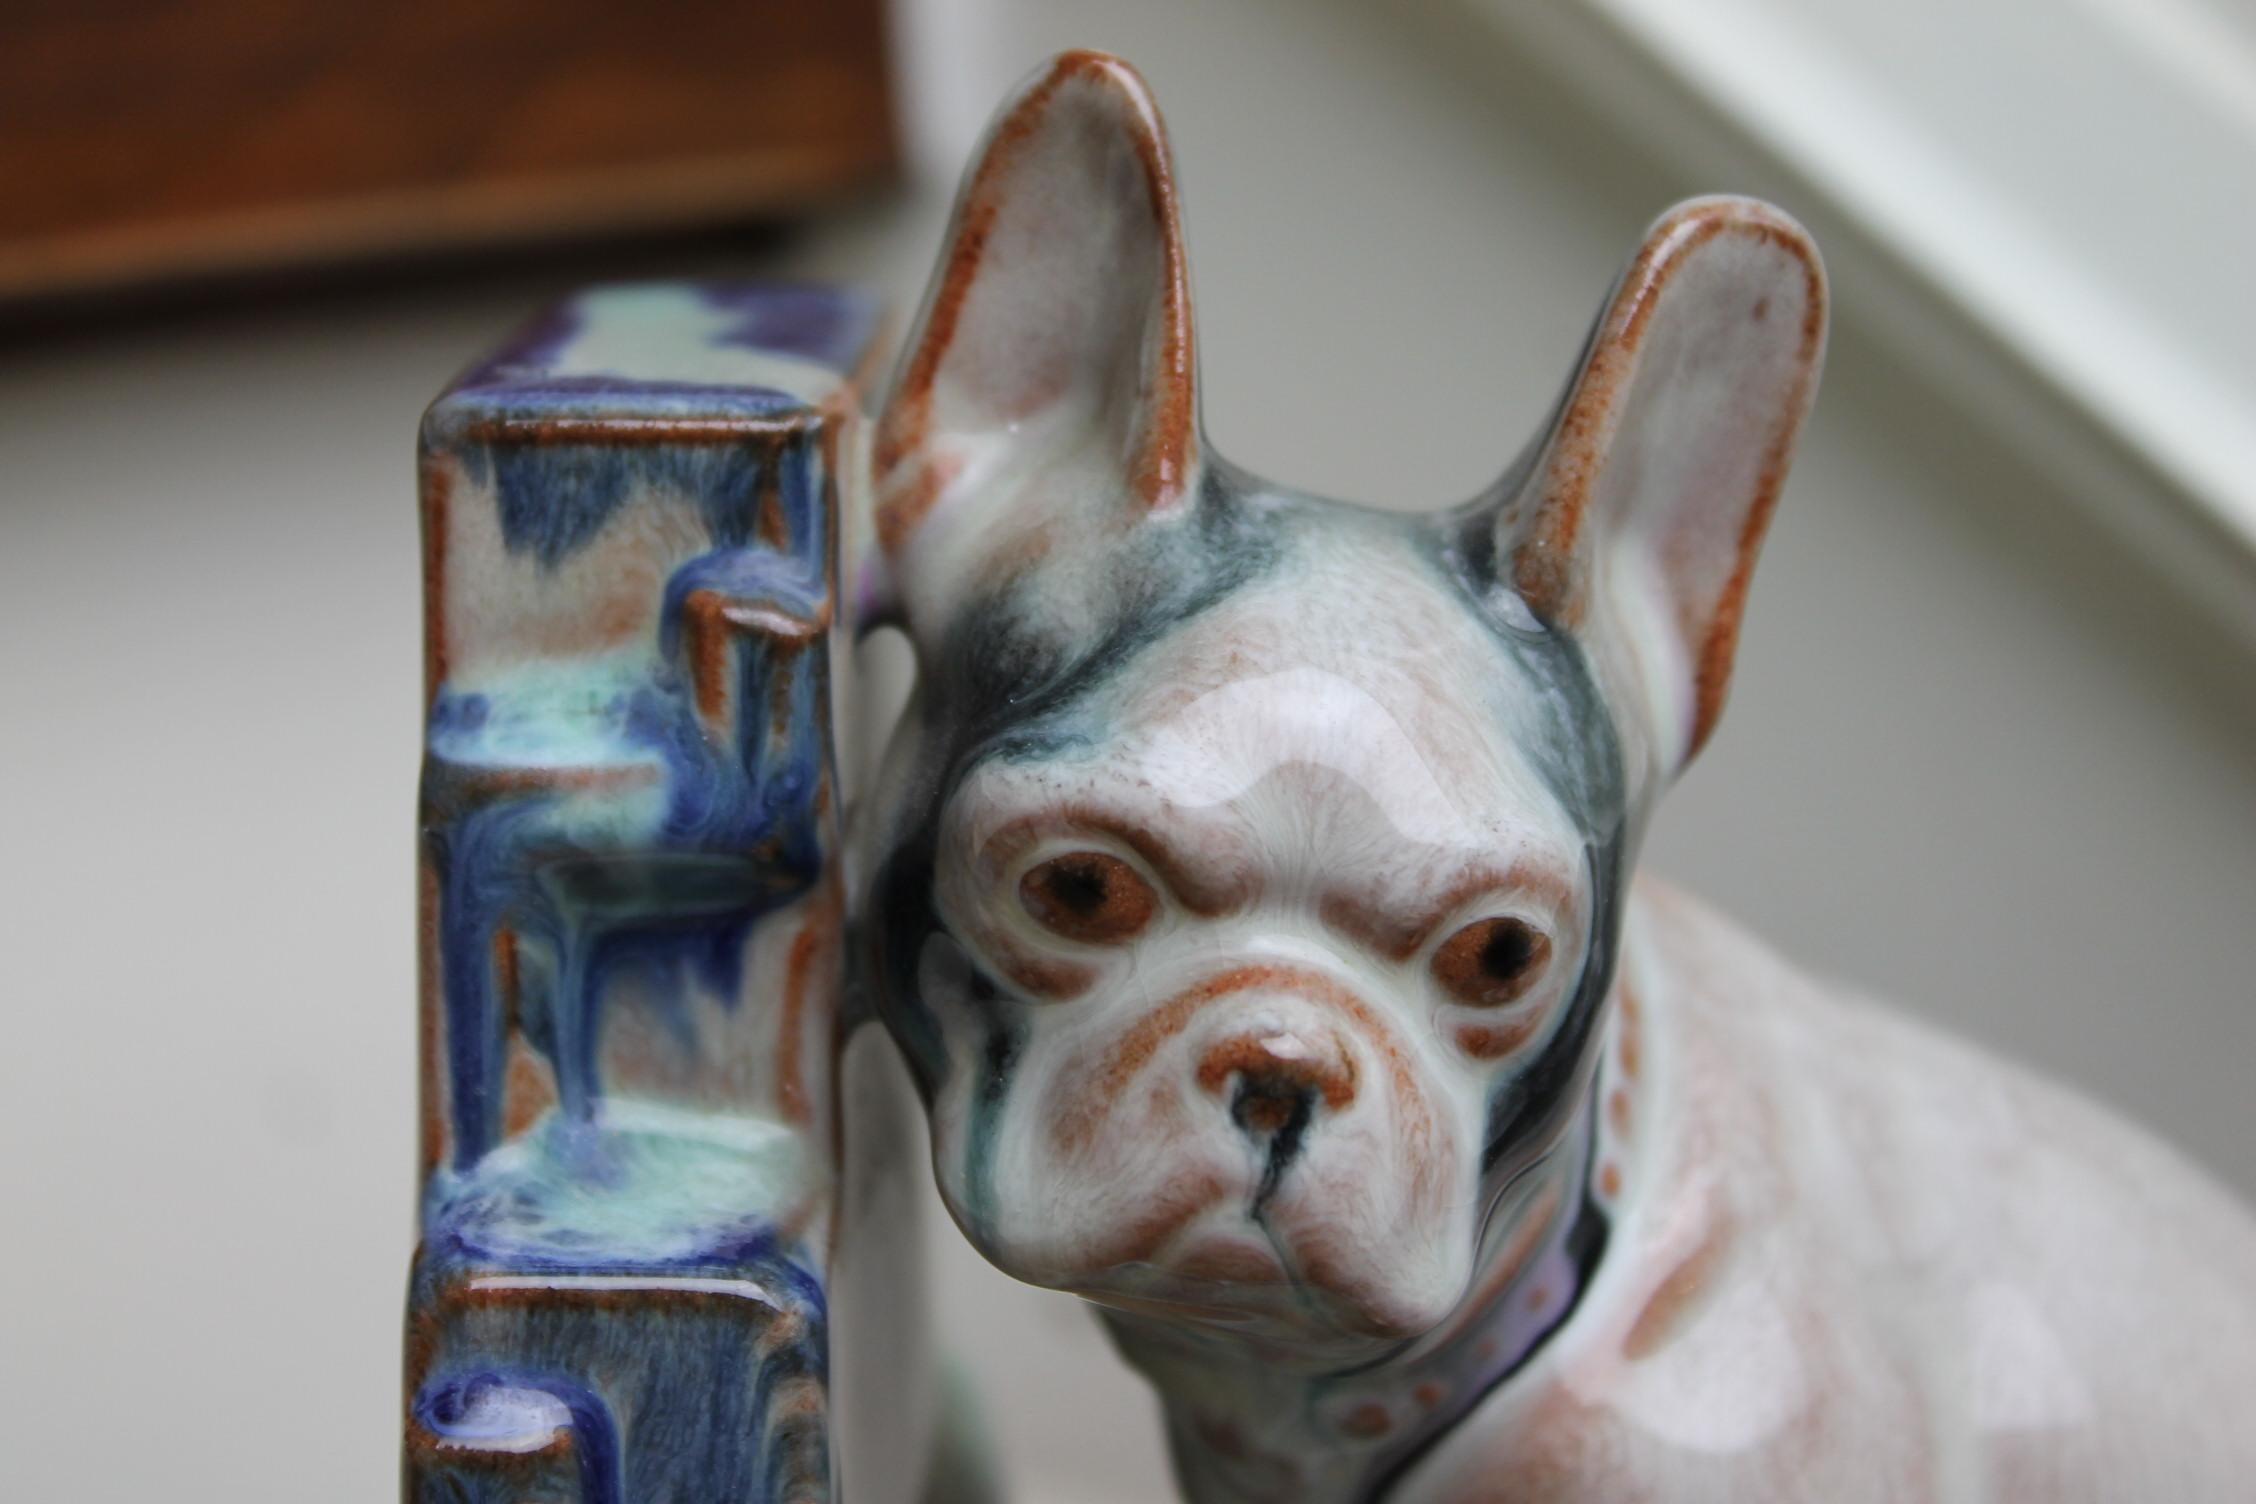 Art Deco bulldog figurine, bookend, statue.
Awesome combination of colors blue, green, brown and grey.
Glazed pottery, drip glaze statue, typical for the Art Deco period.
Marked at the bottom XS 575 and a crown, attributed to Goebel